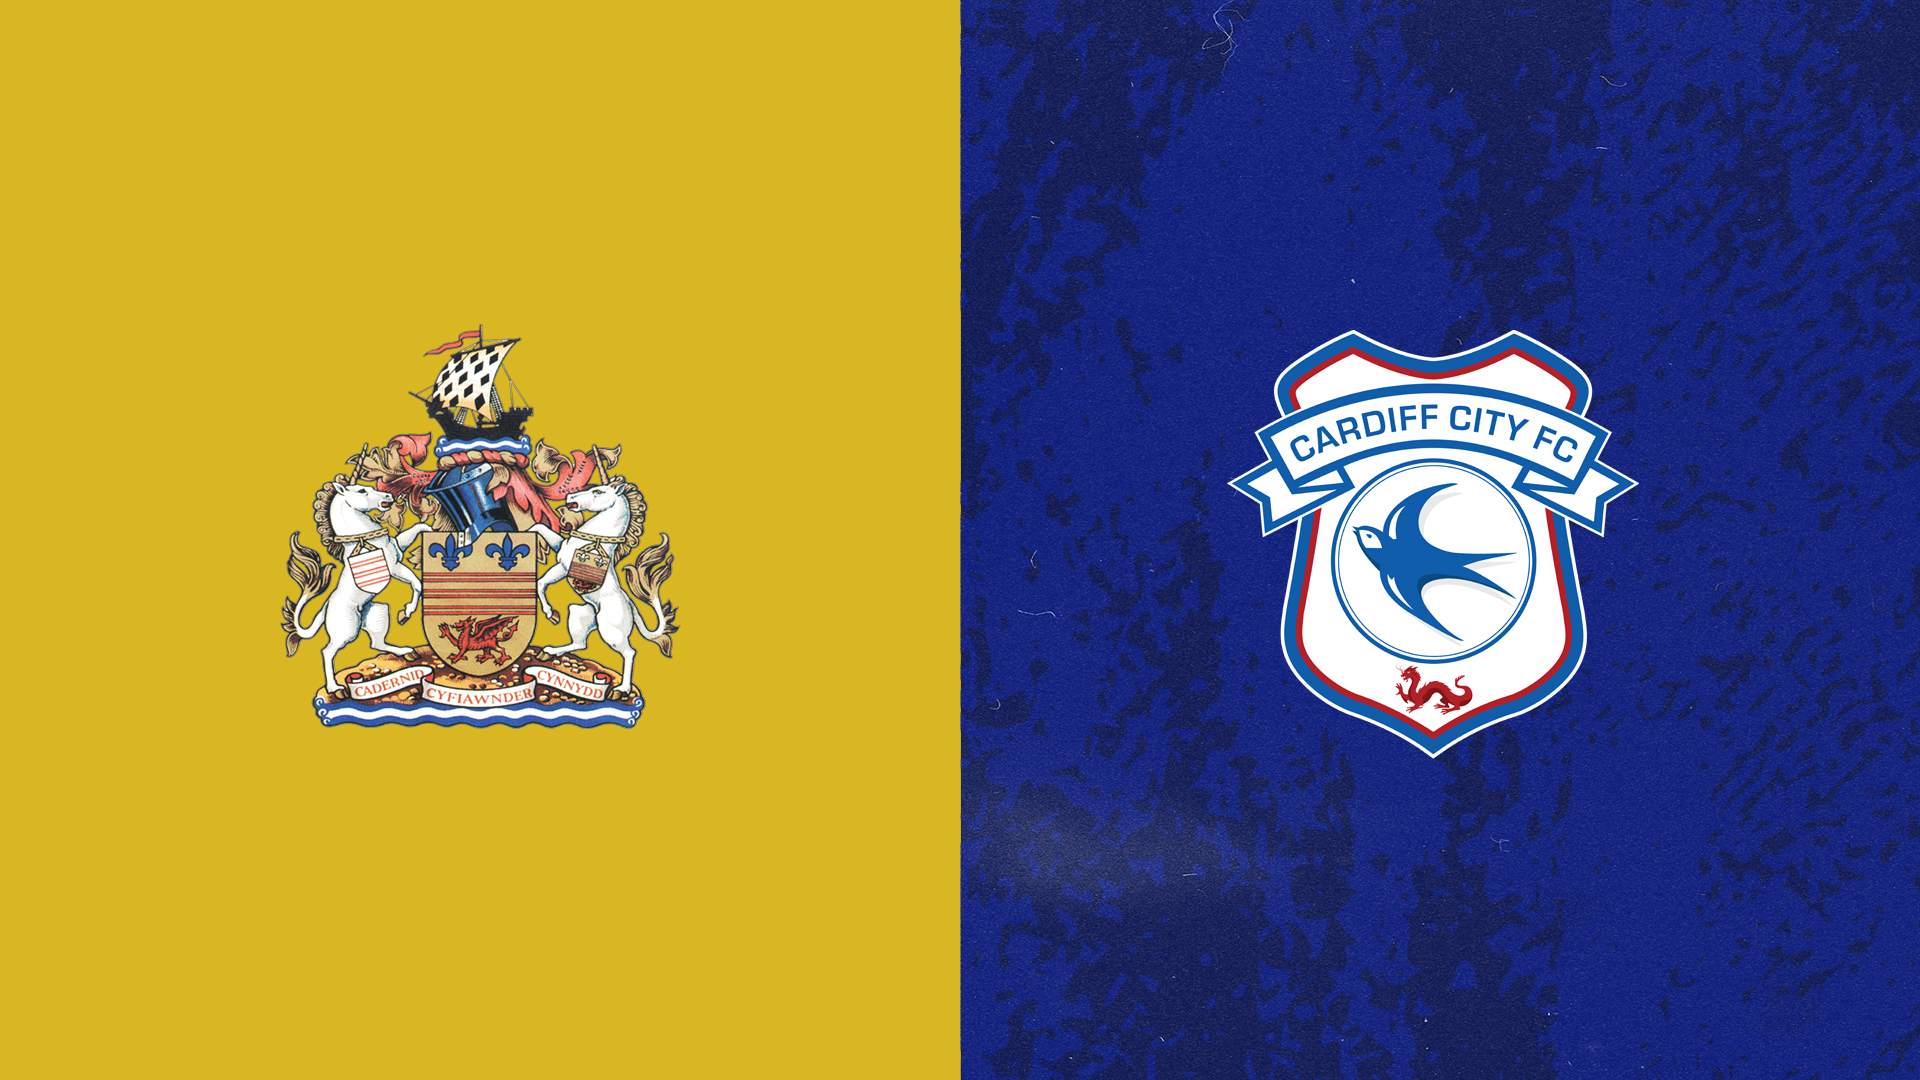 LIVE FOOTBALL: Cardiff City v Barry Town United